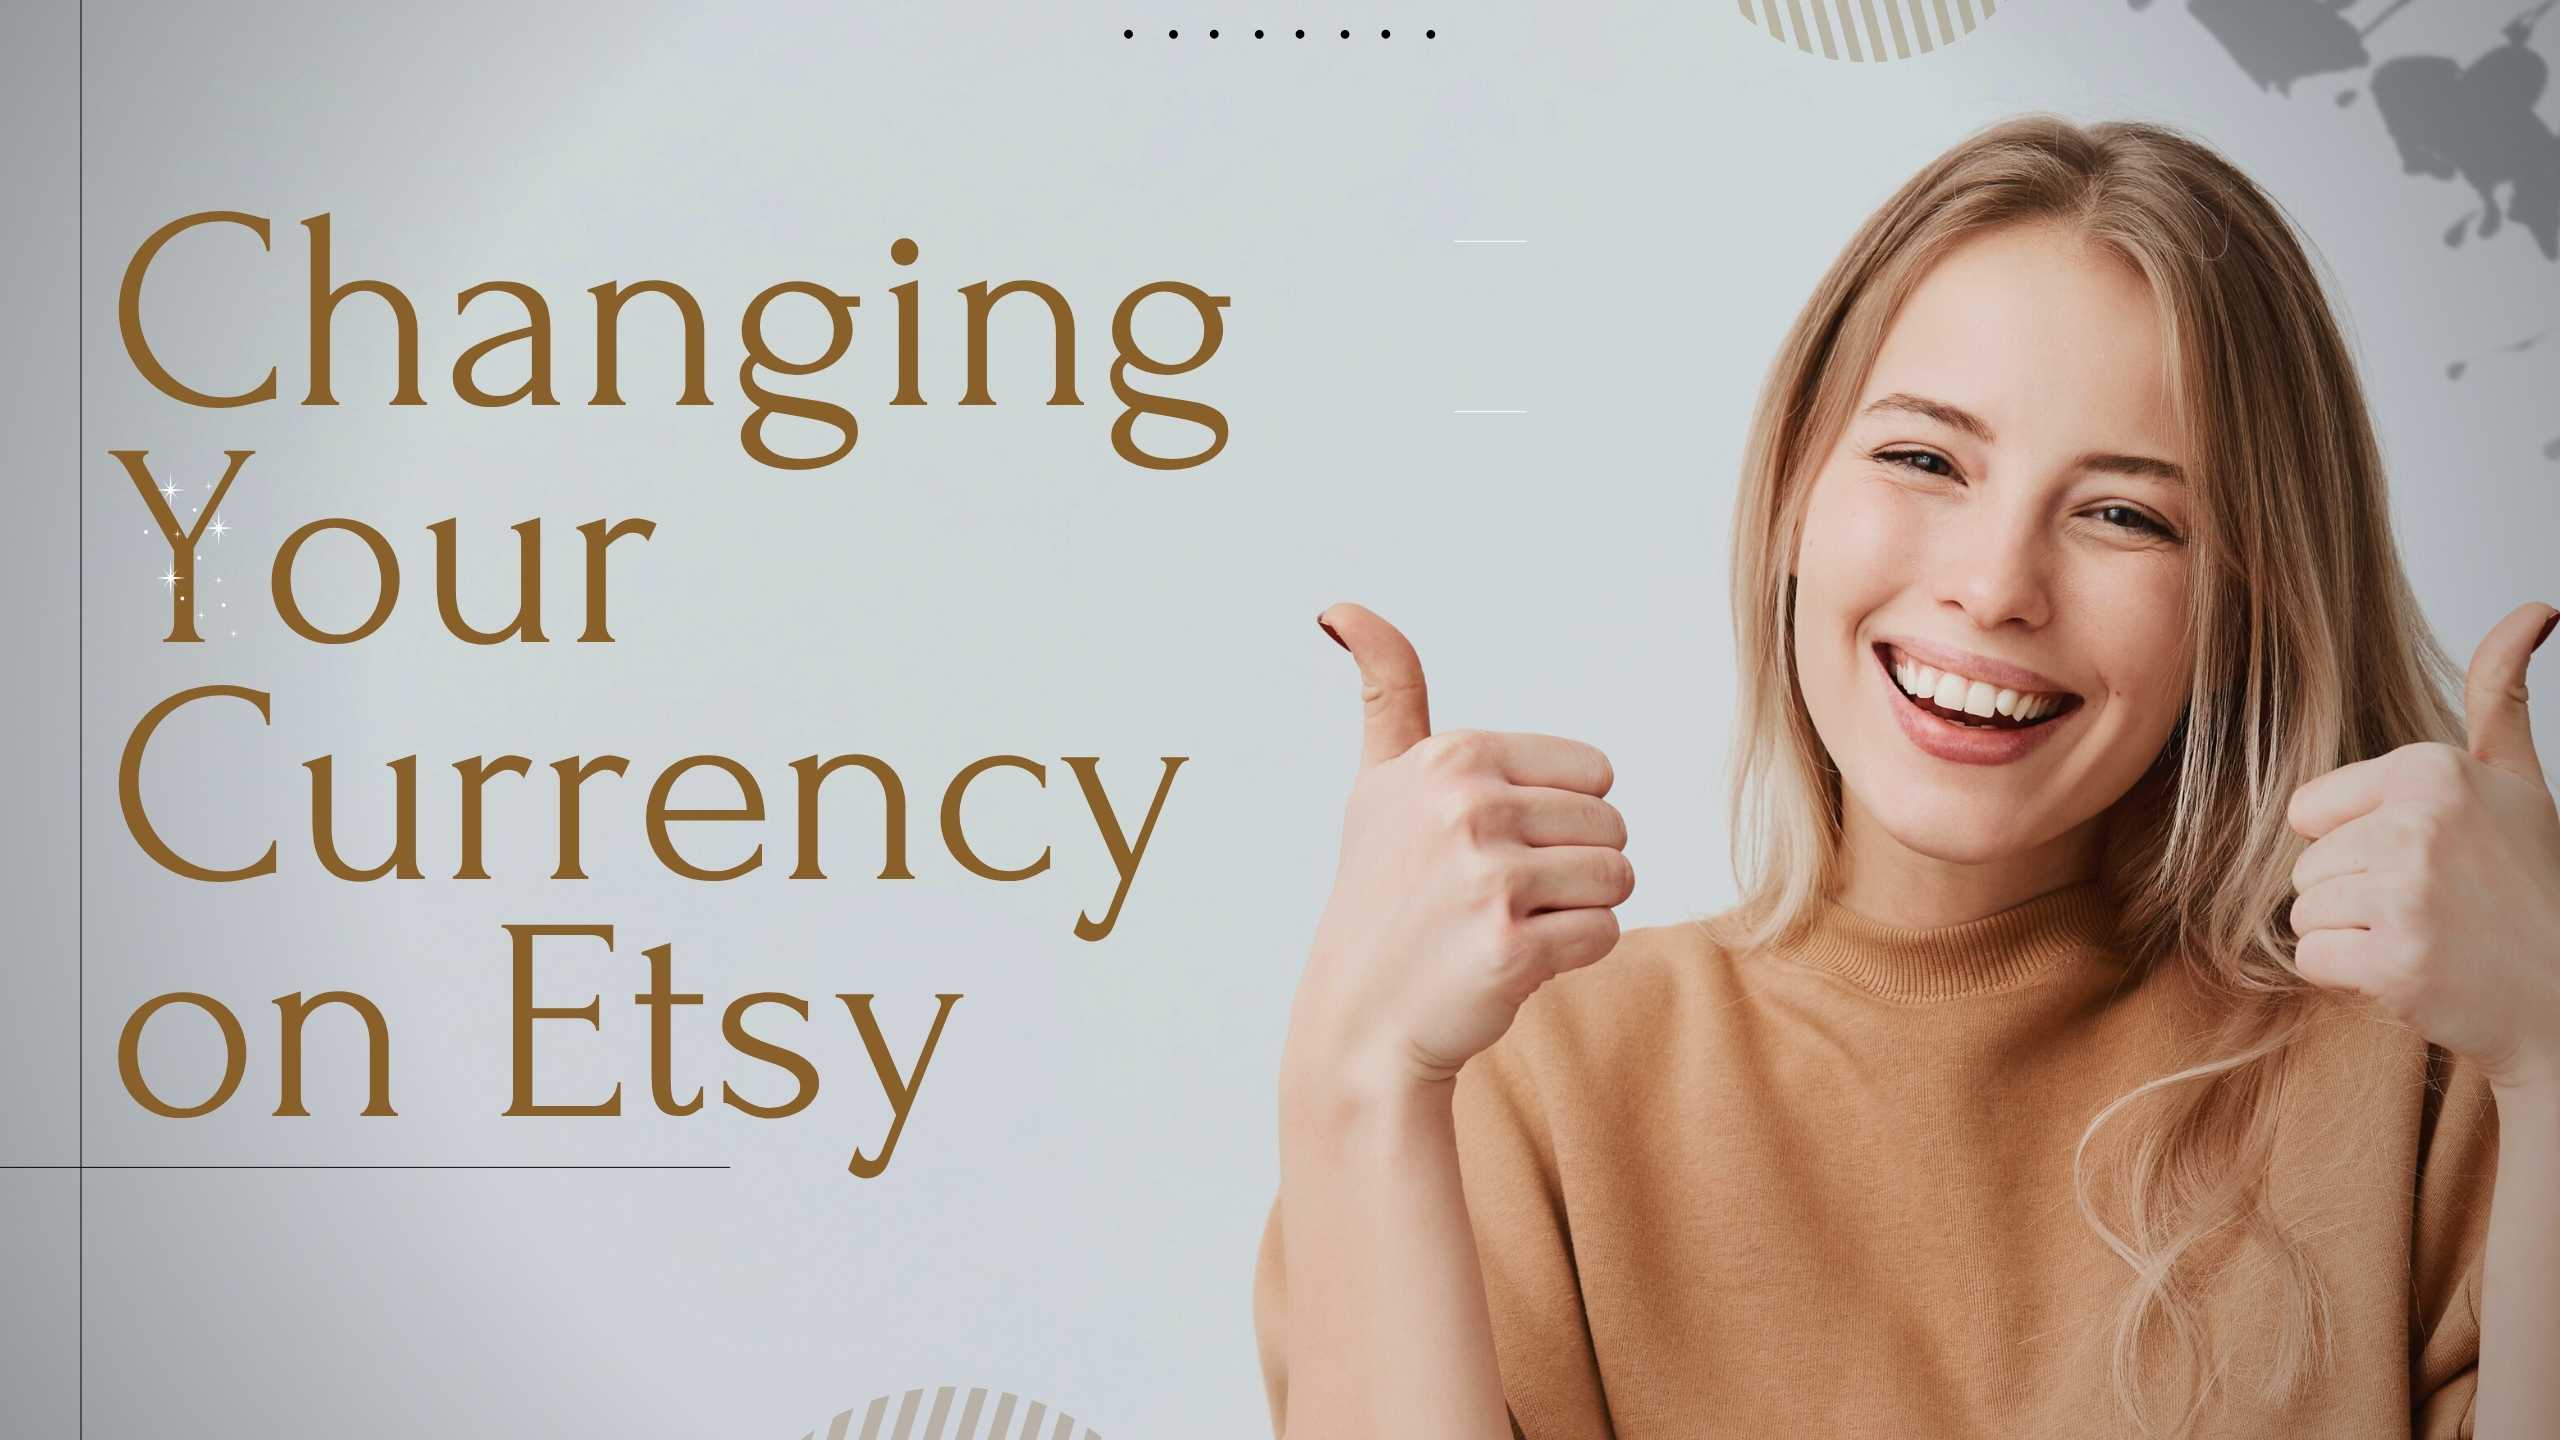 A Step-by-Step Guide to Changing Your Currency on Etsy